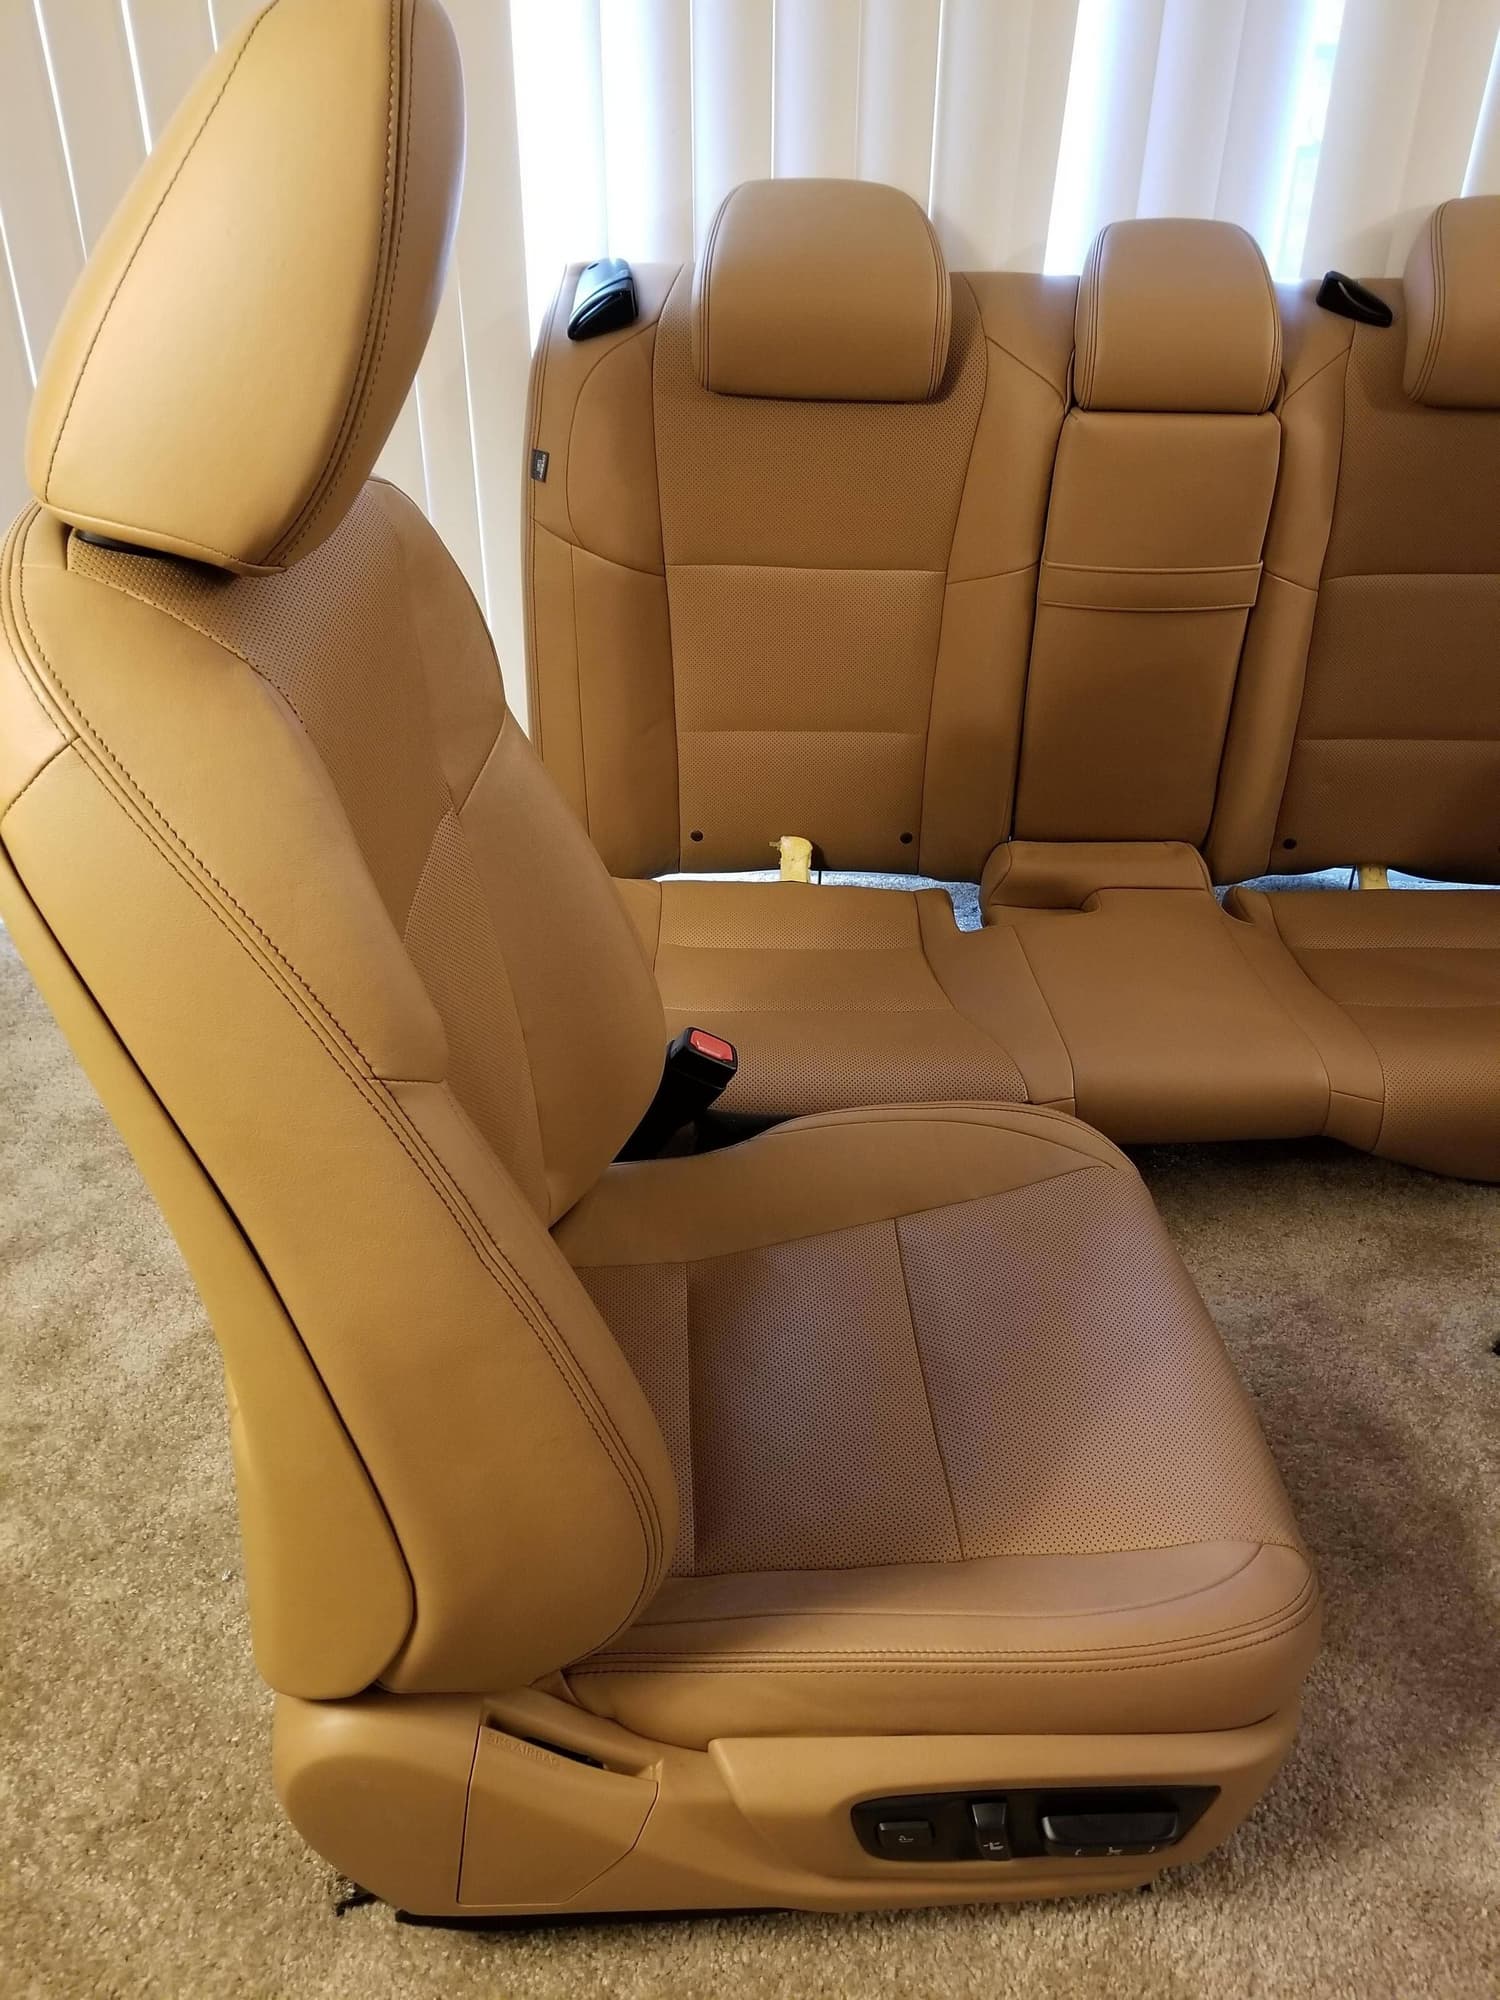 Interior/Upholstery - 2013-2019 Lexus GS Complete Front and Rear Seats Flaxen - Used - 2013 to 2019 Lexus GS350 - 2013 to 2019 Lexus GS450h - Falls Church, VA 22043, United States